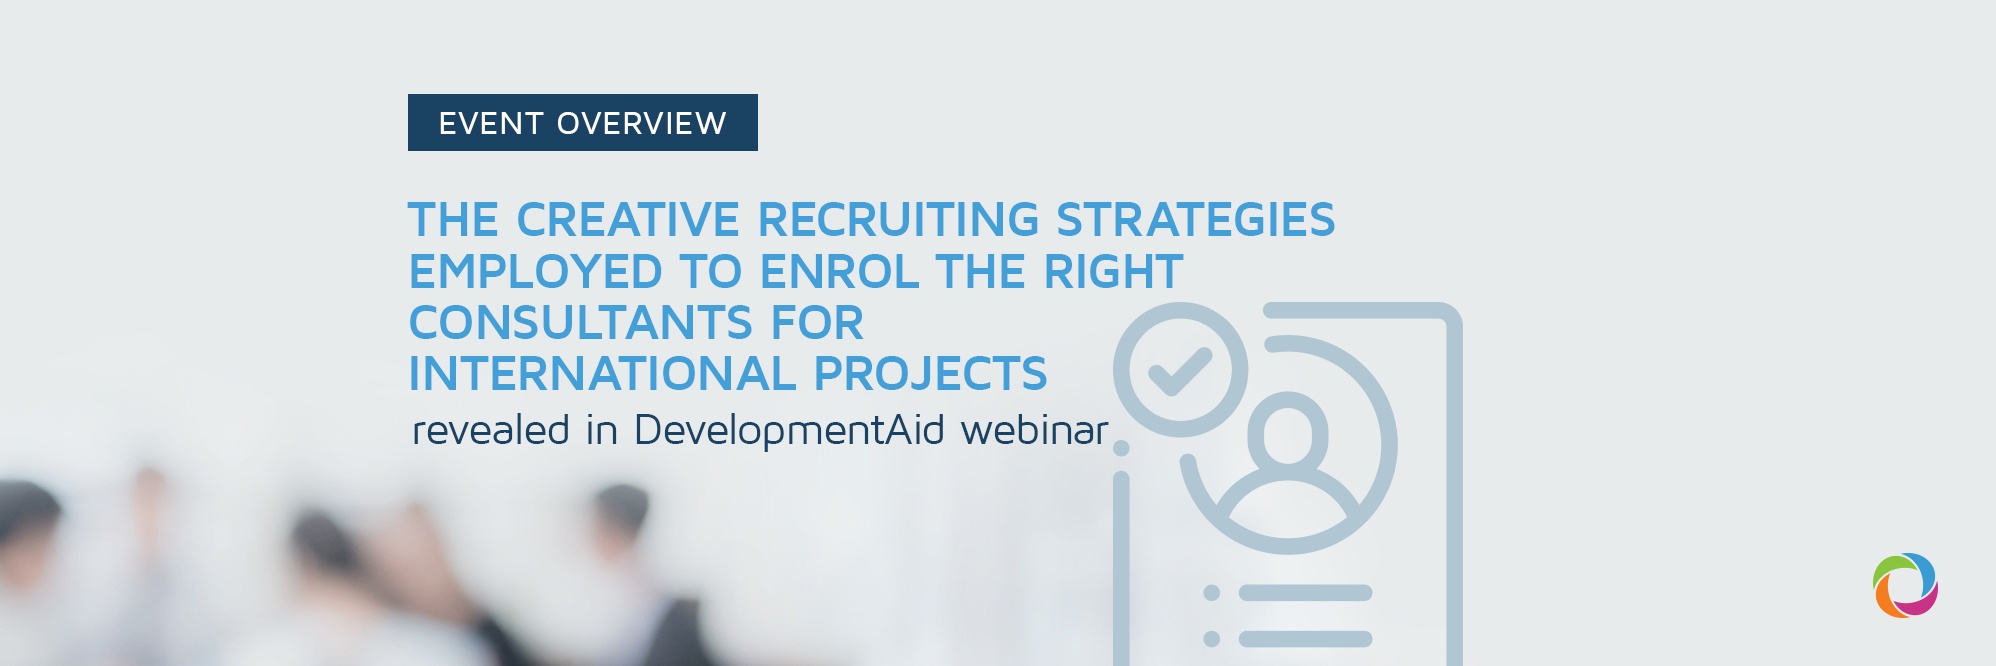 The creative recruiting strategies employed to enrol the right consultants for international projects revealed in DevelopmentAid webinar